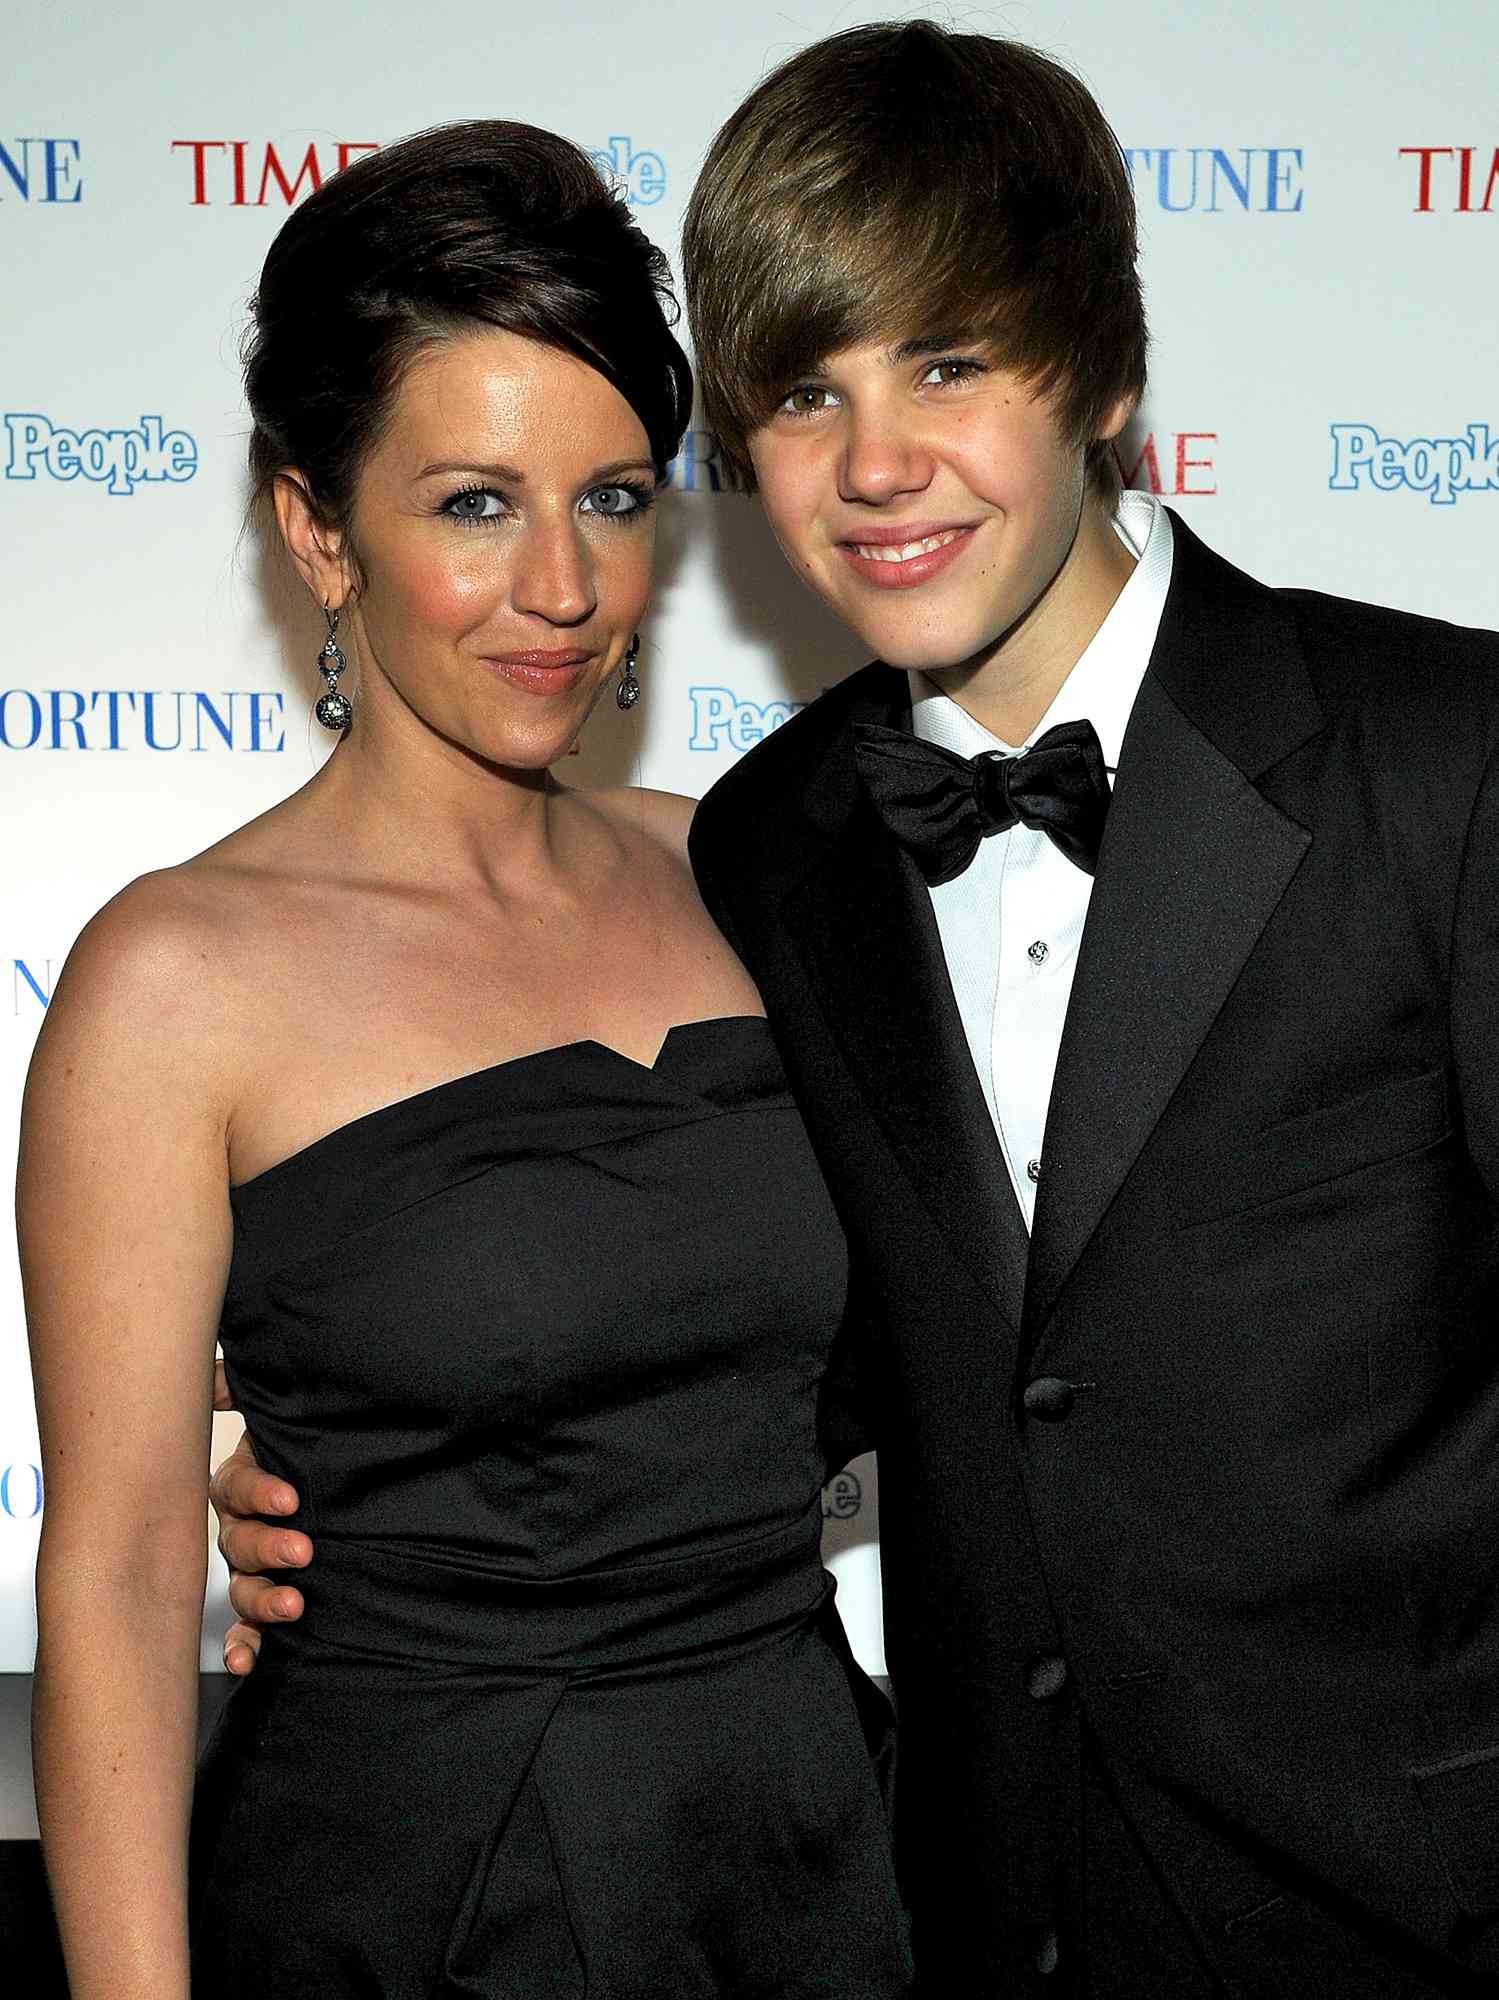 Justin Bieber and Pattie Mallette attend the TIME/CNN/People/Fortune 2010 White House Correspondents' dinner pre-party on May 1, 2010 in Washington, DC. 